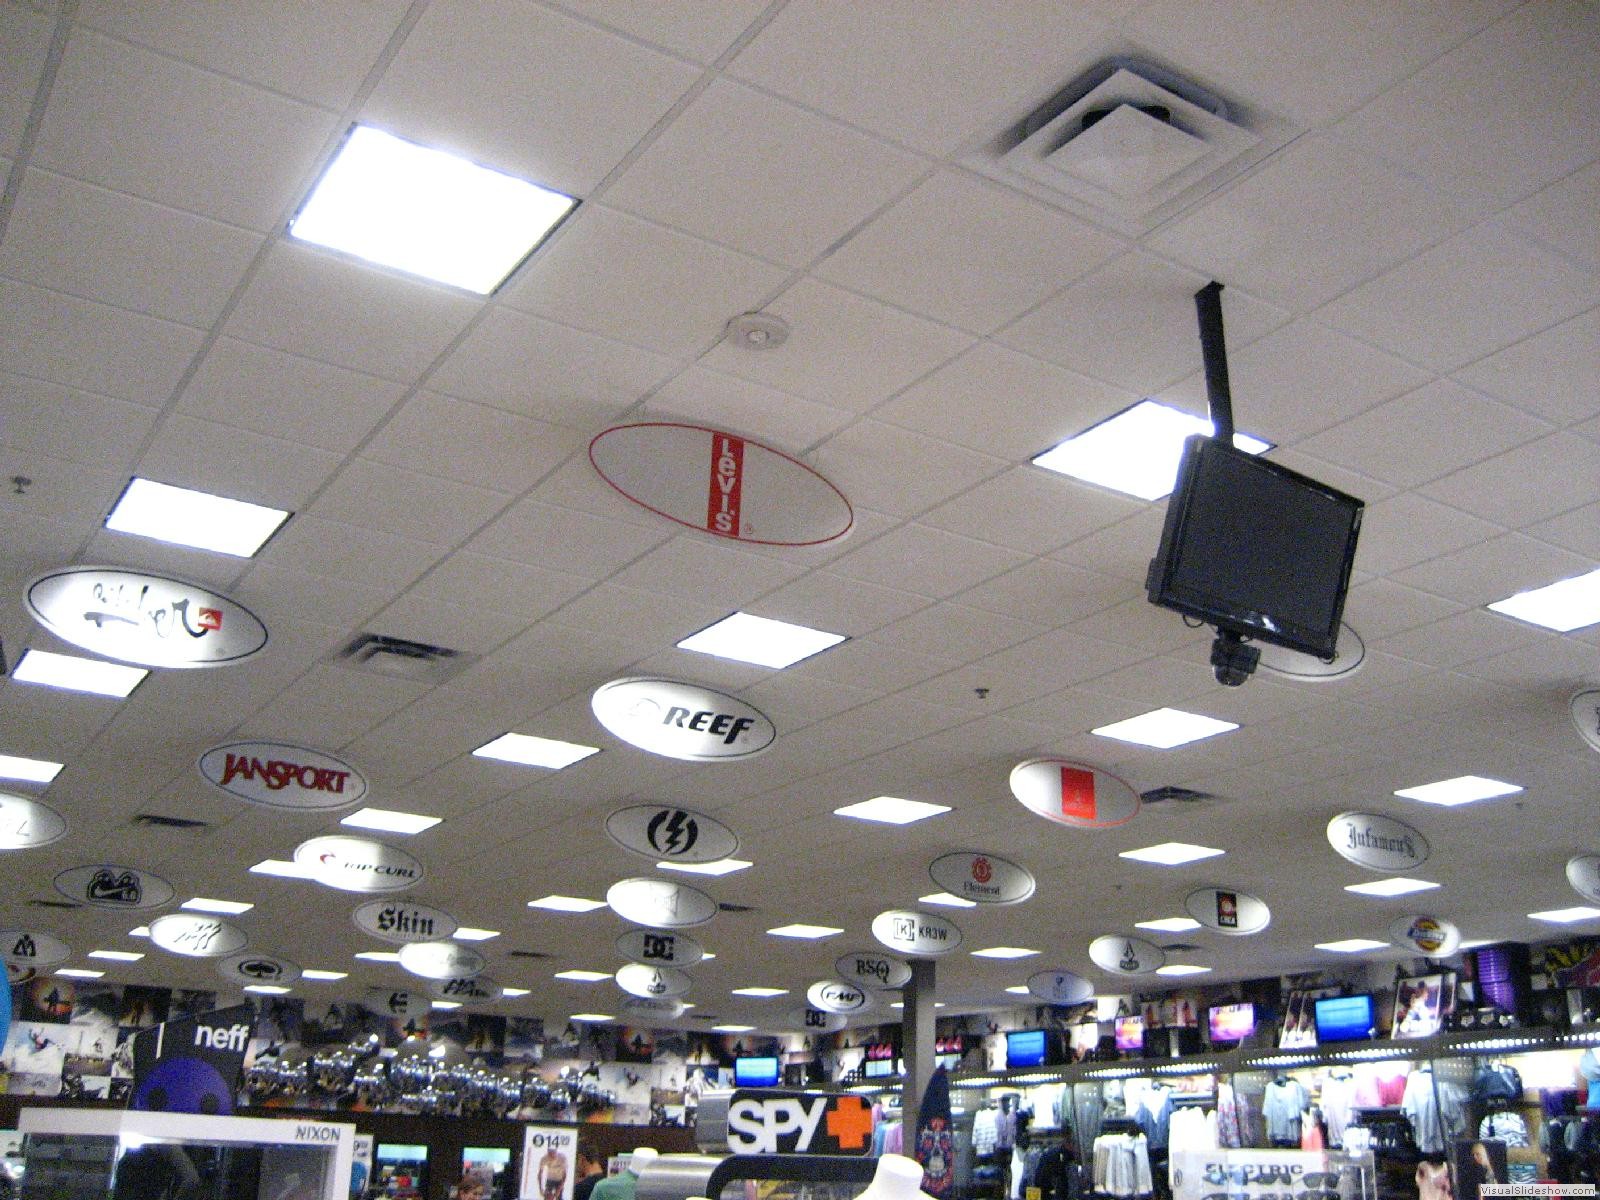 5. Tillys Store After Painting